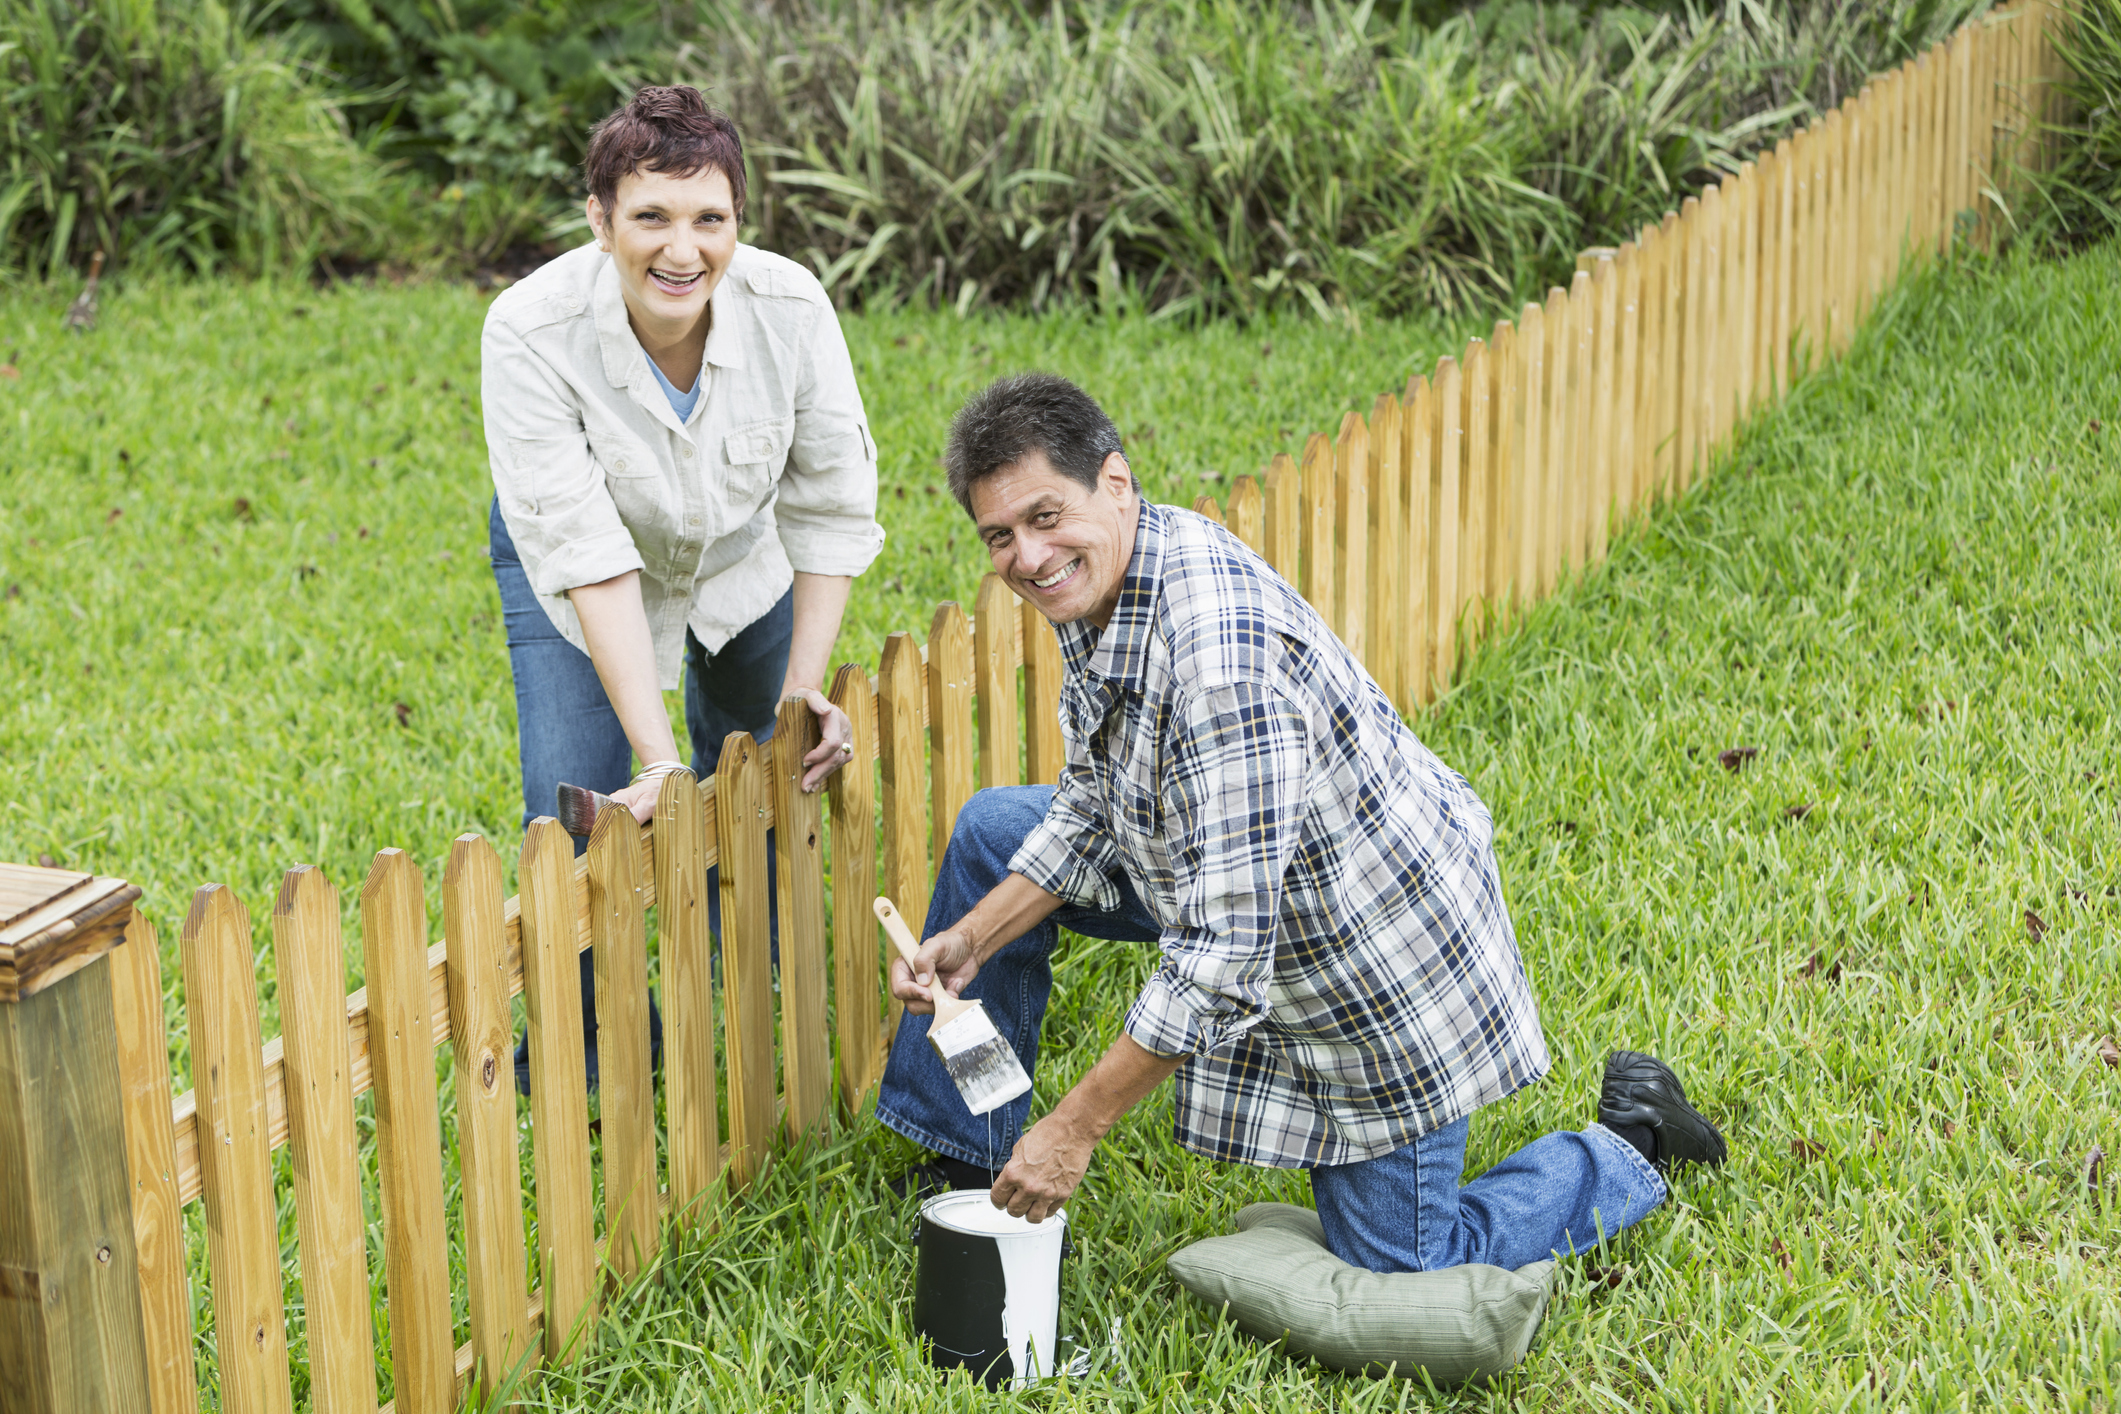 When starting your fence installation, you want to make sure to not disrupt...